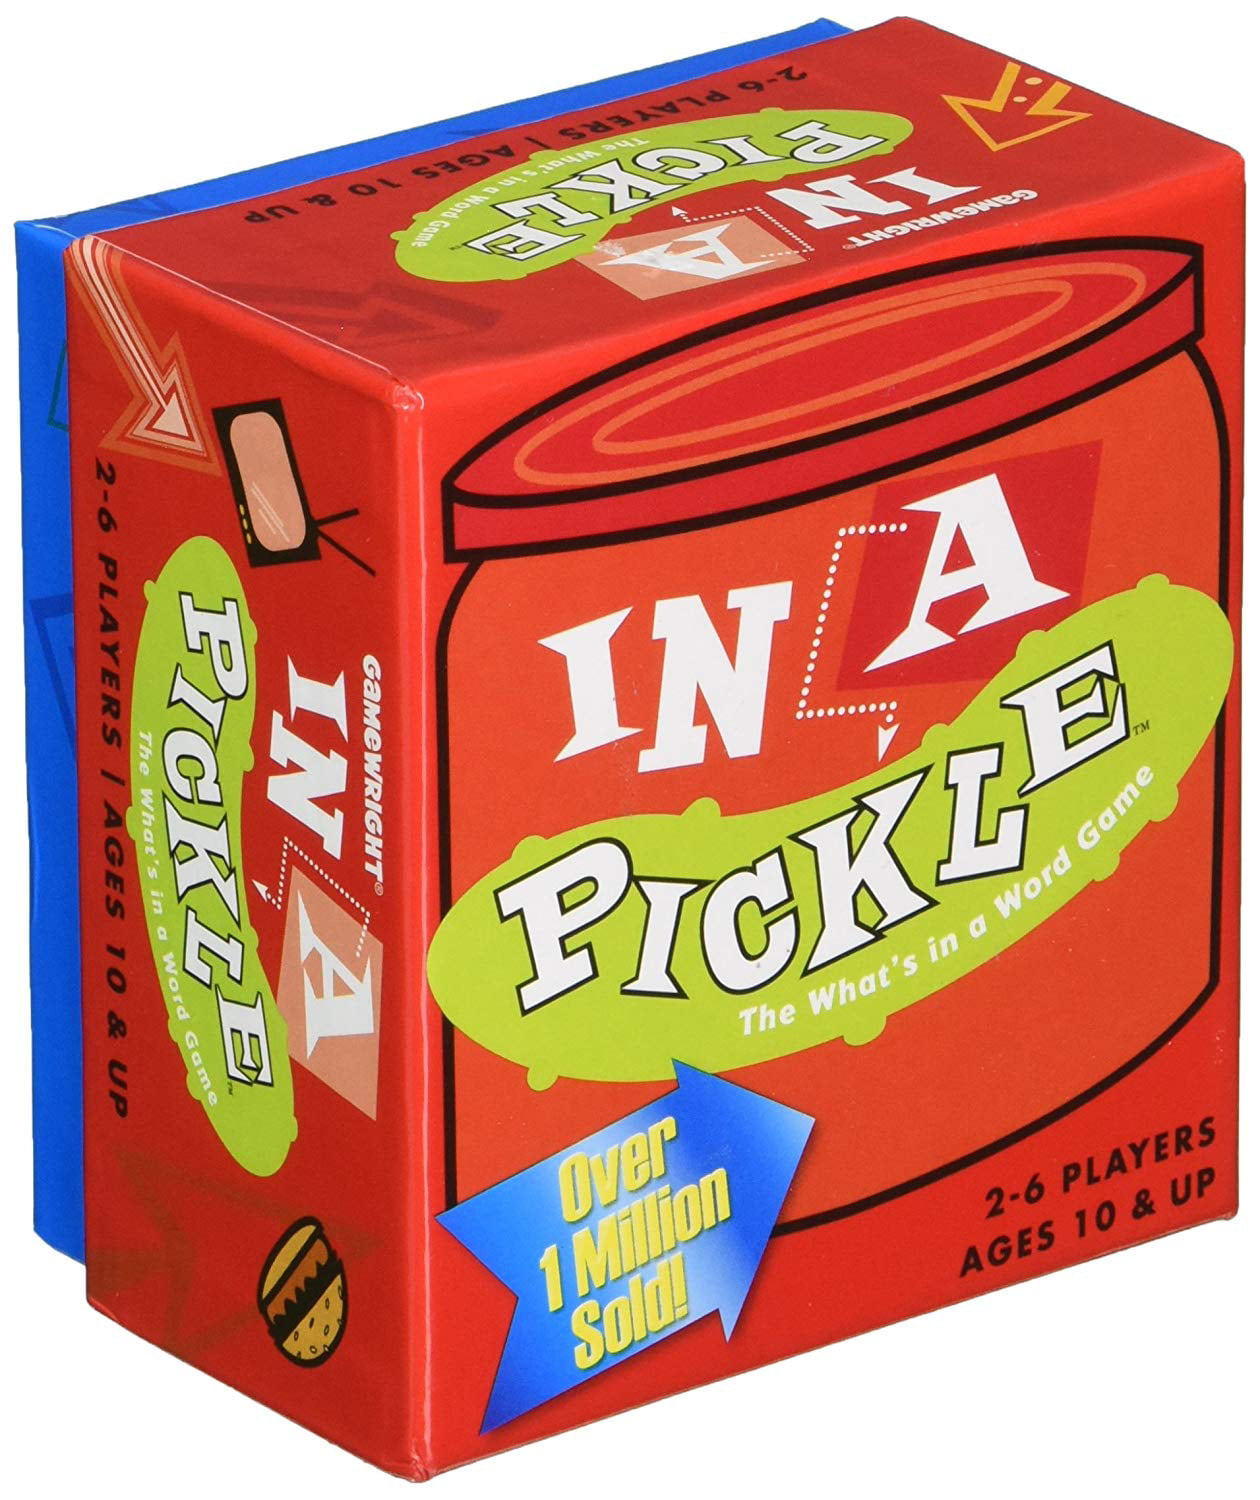 THE WHAT'S IN A WORD GAME FAMILY CARD GAME FUN FOR KIDS GAMEWRIGHT IN A PICKLE 